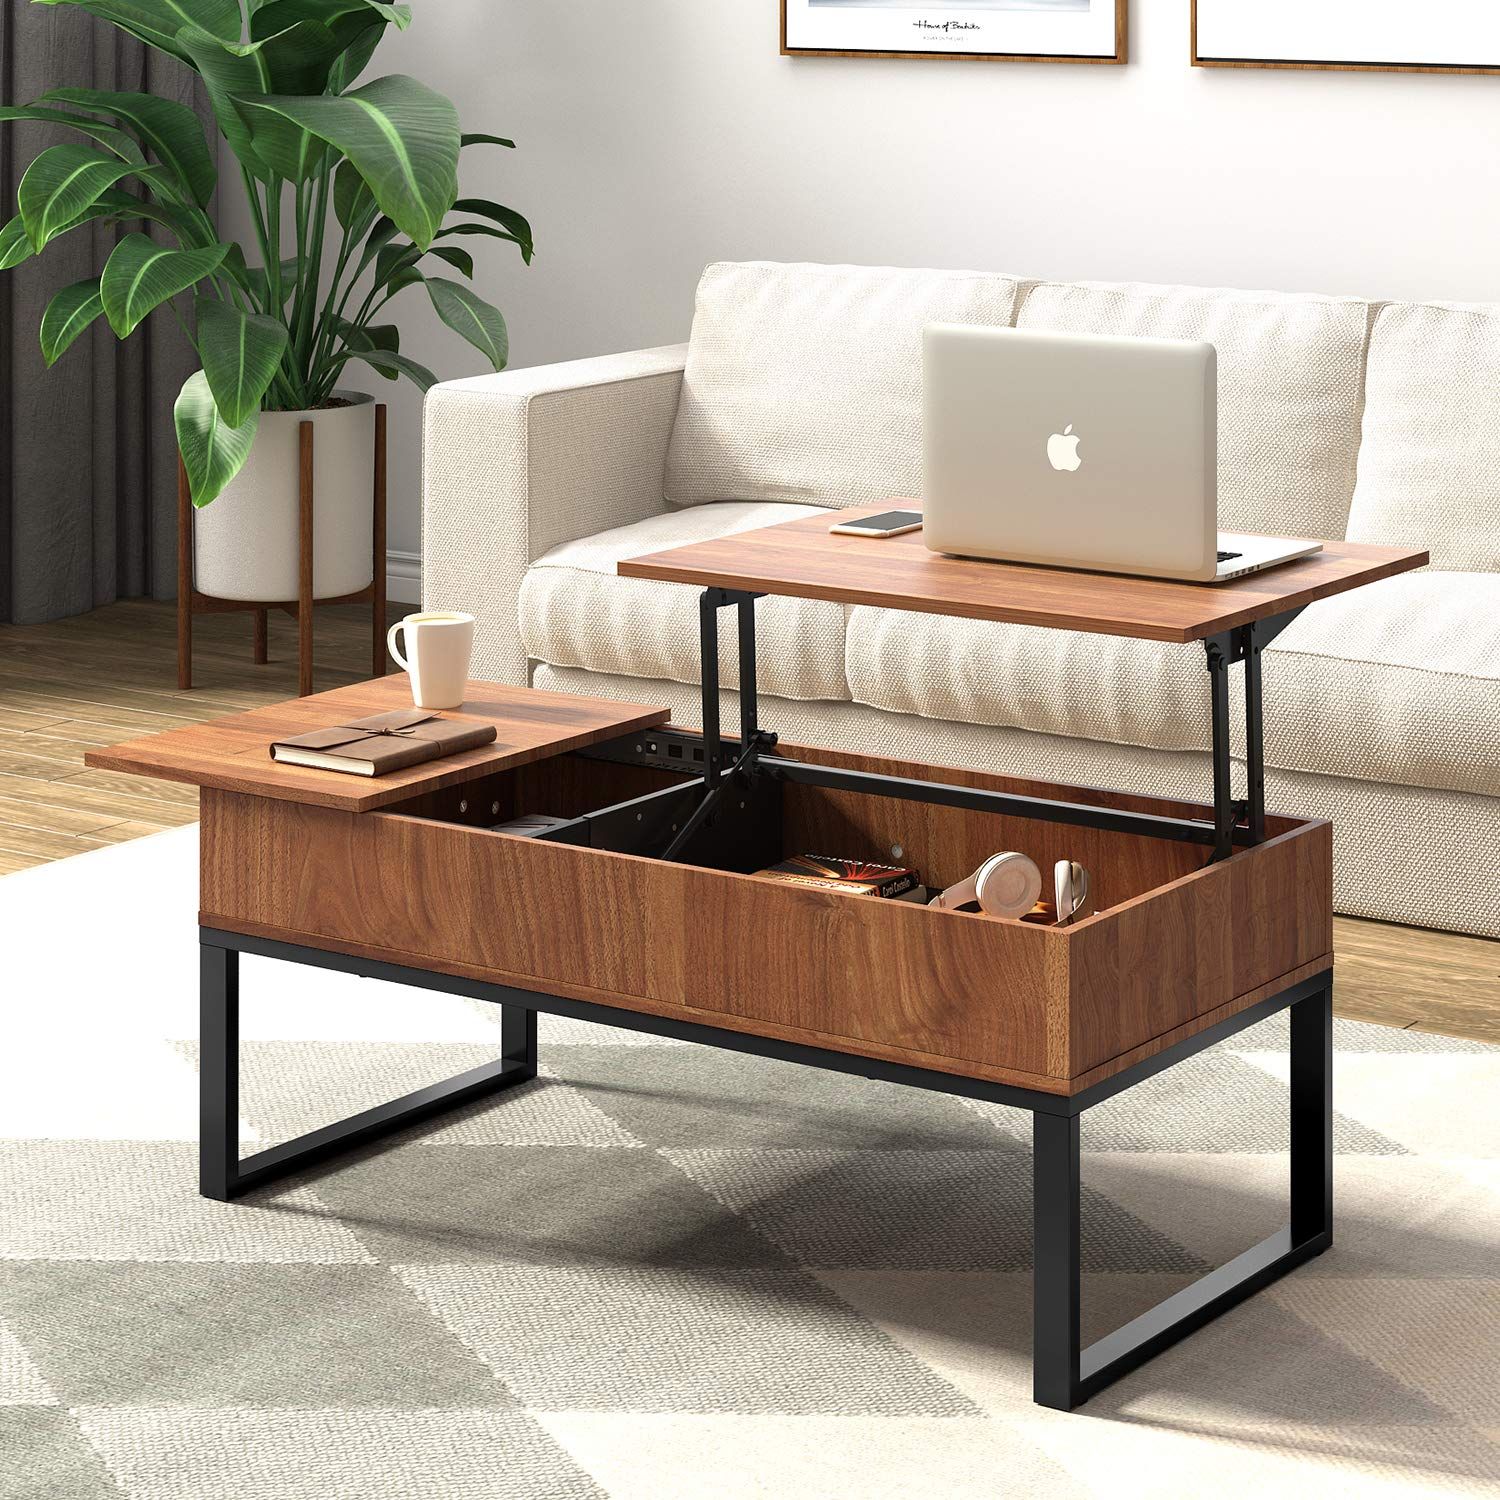 Wlive Wood Coffee Table With Adjustable Lift Top Table, Metal Frame Inside Wood Lift Top Coffee Tables (Gallery 6 of 20)